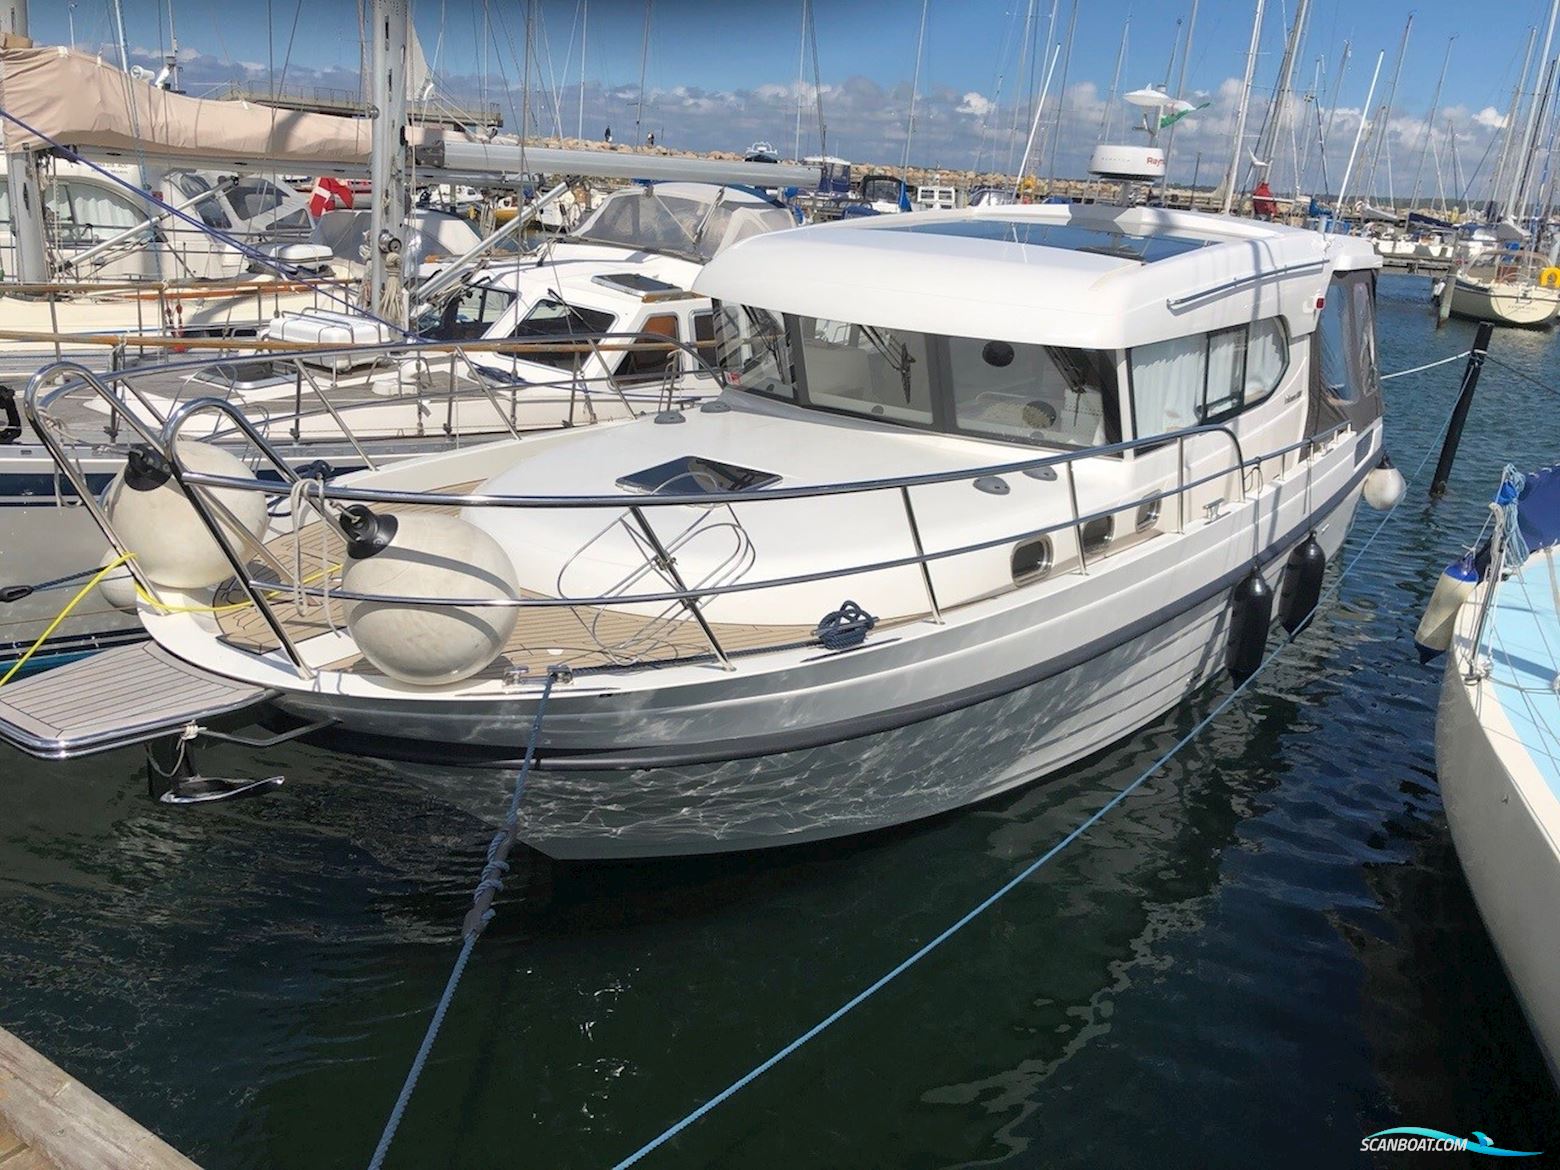 Viknes 1080 Boat type not specified 2020, with Yanmar engine, Denmark